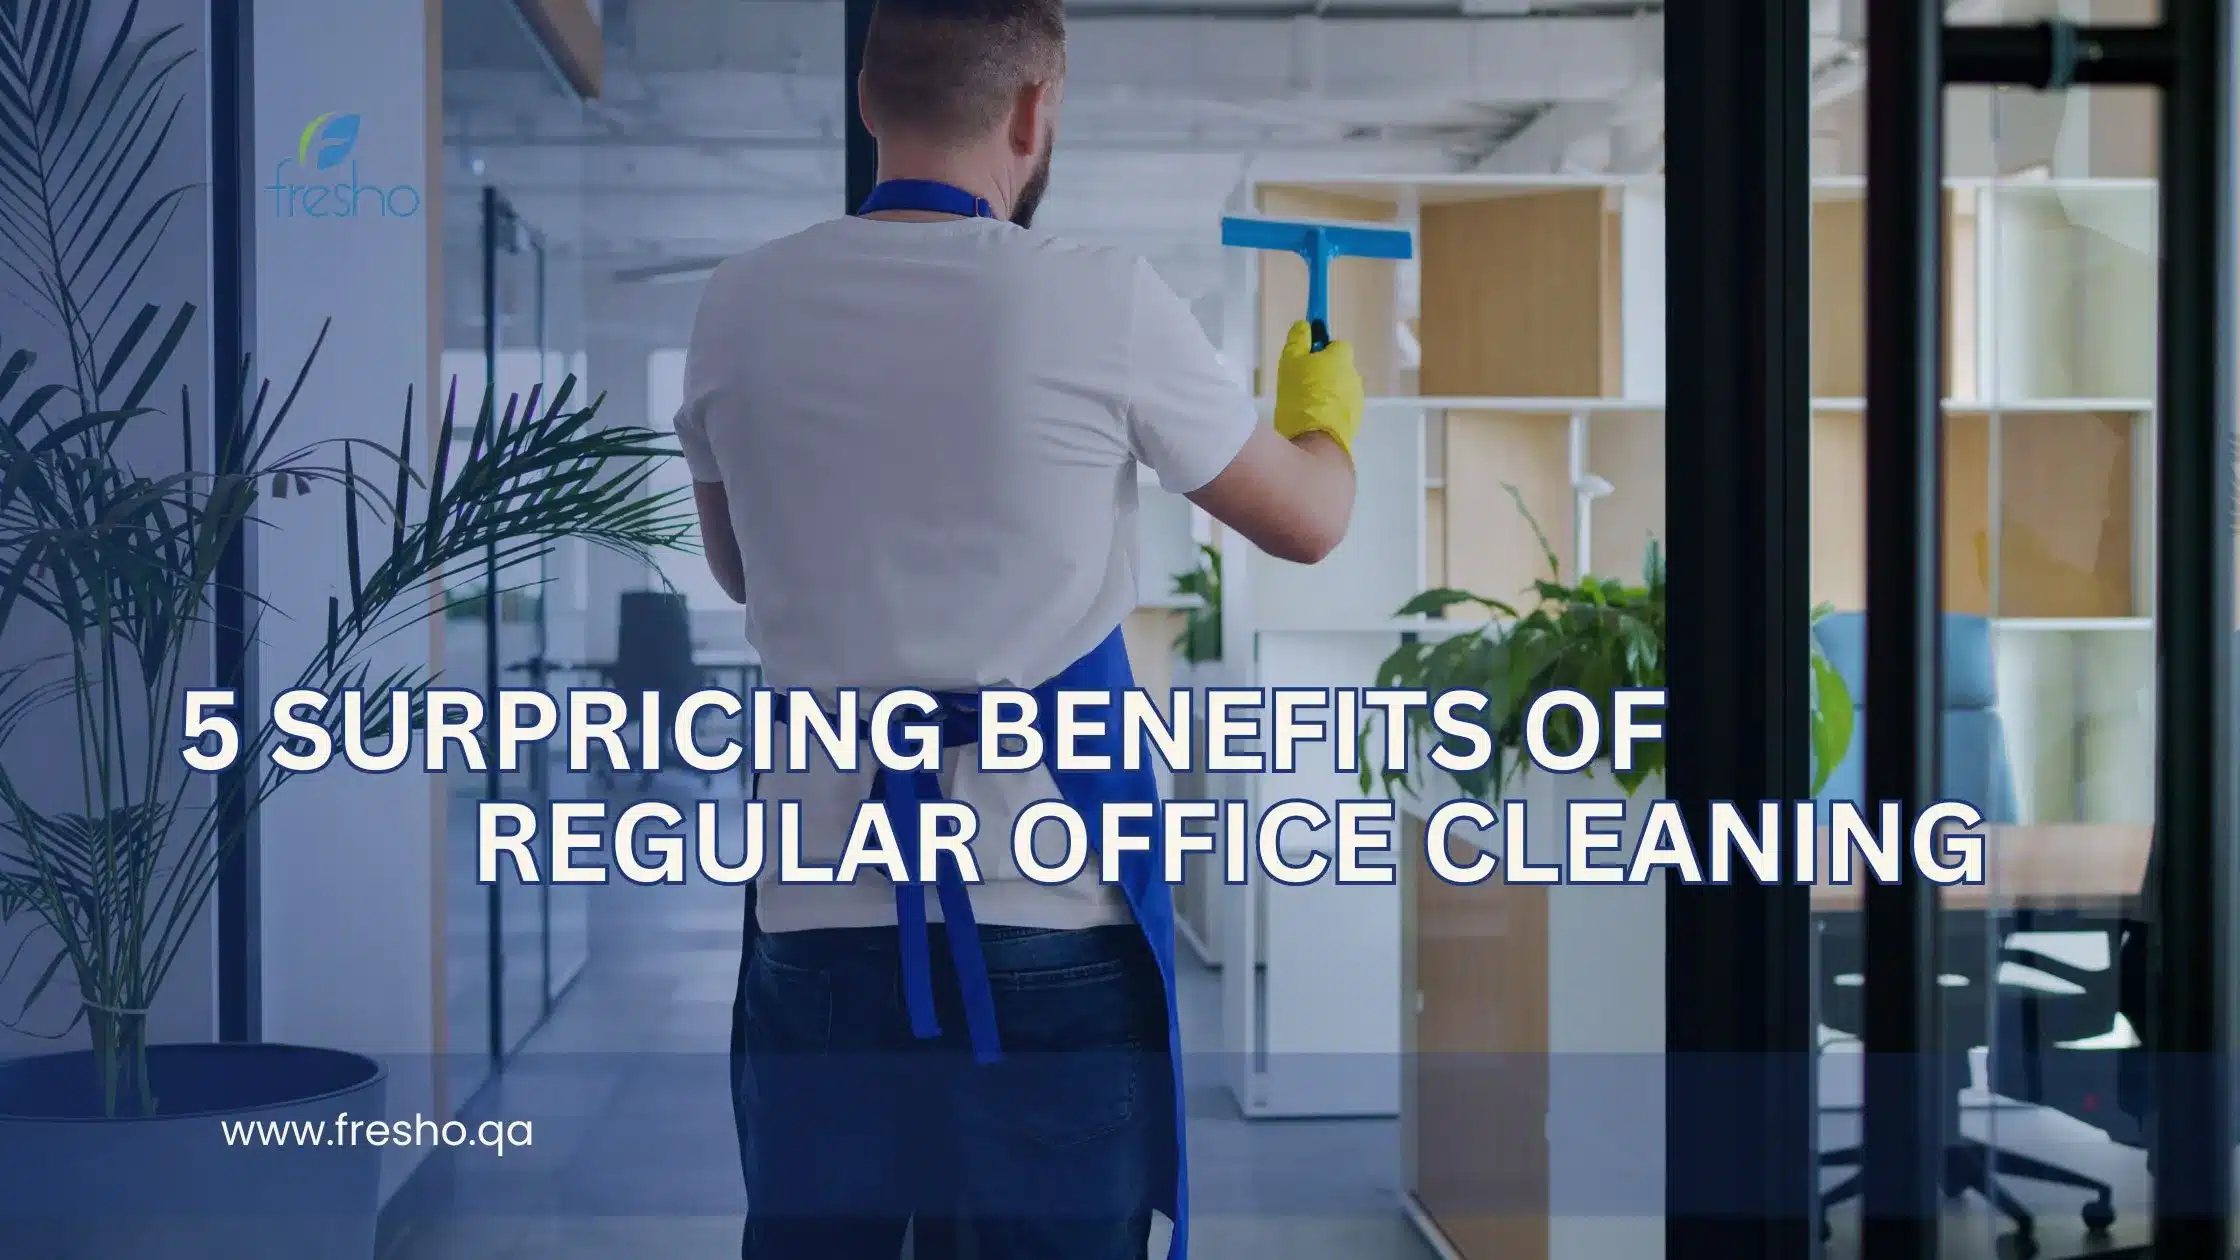 5 Surprising Benefits of Regular Office Cleaning